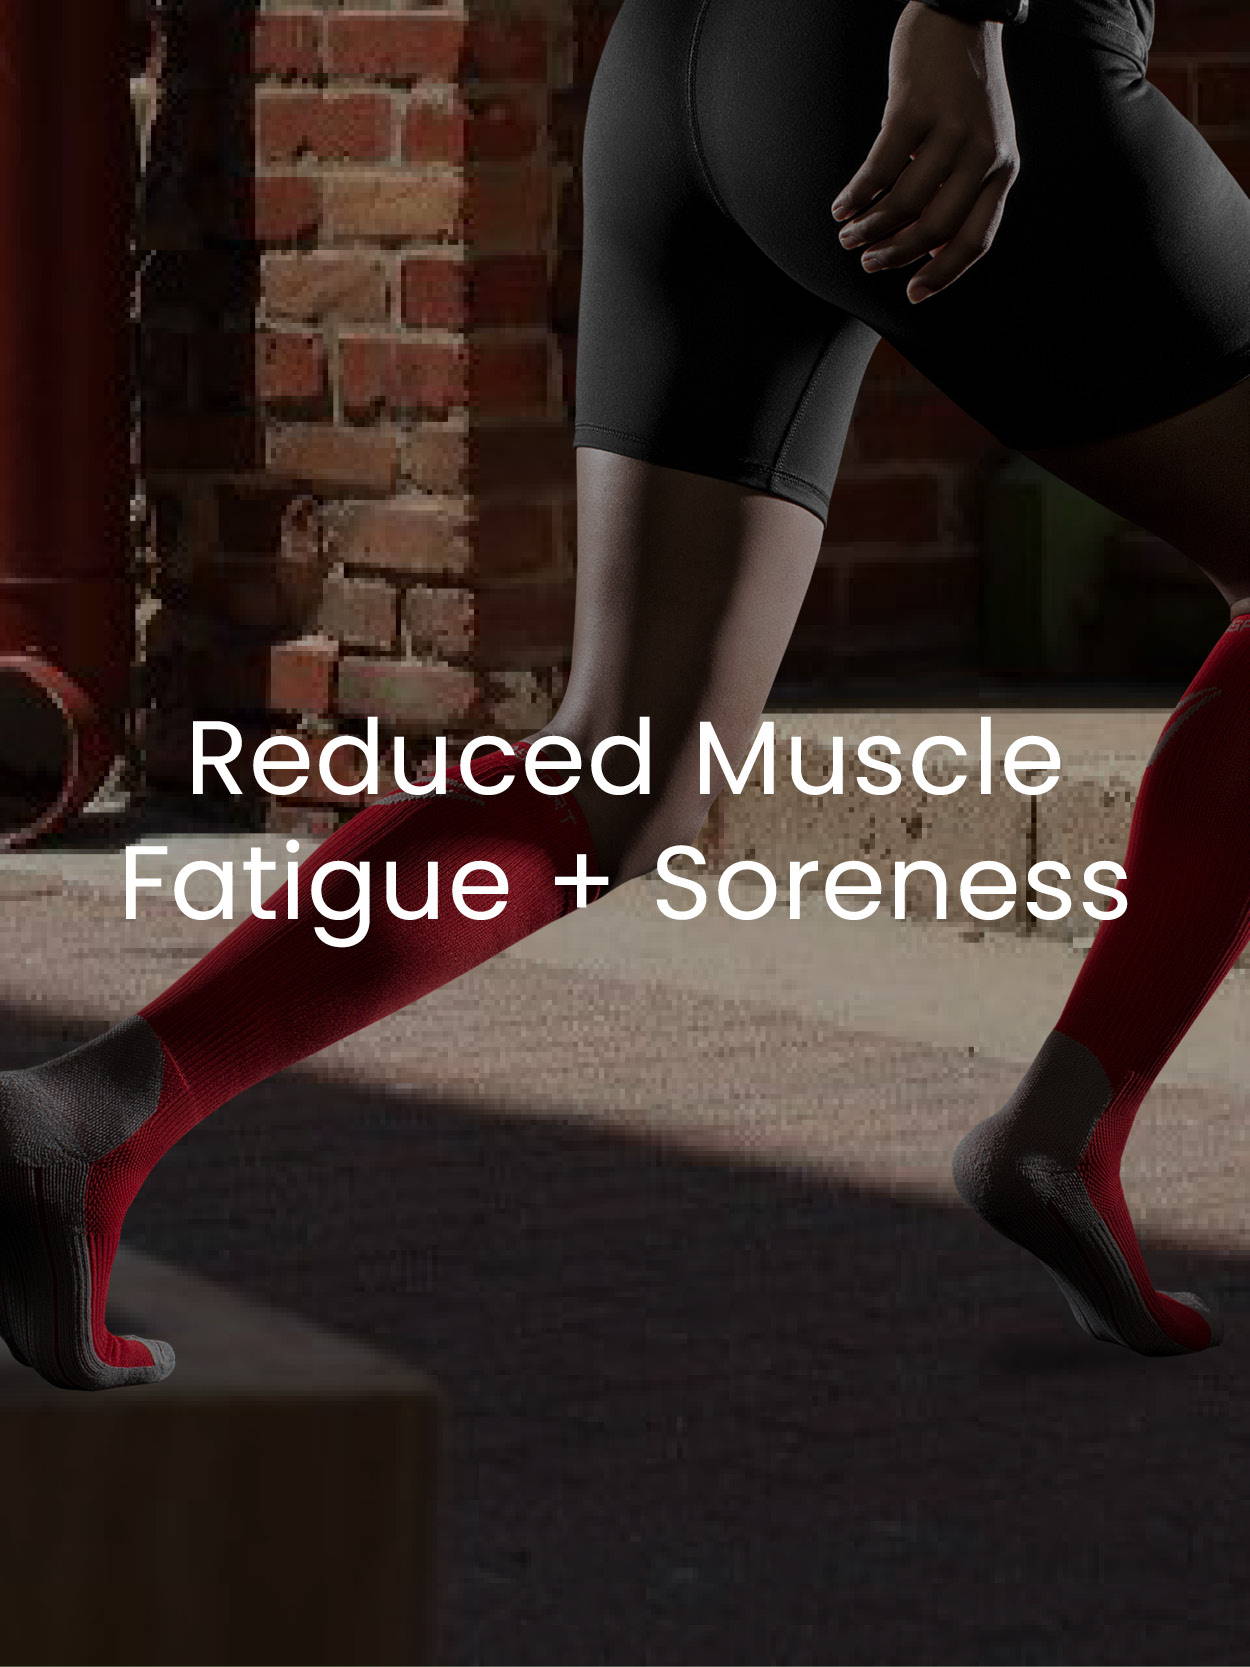 Reduced Muscle Fatigue + Soreness